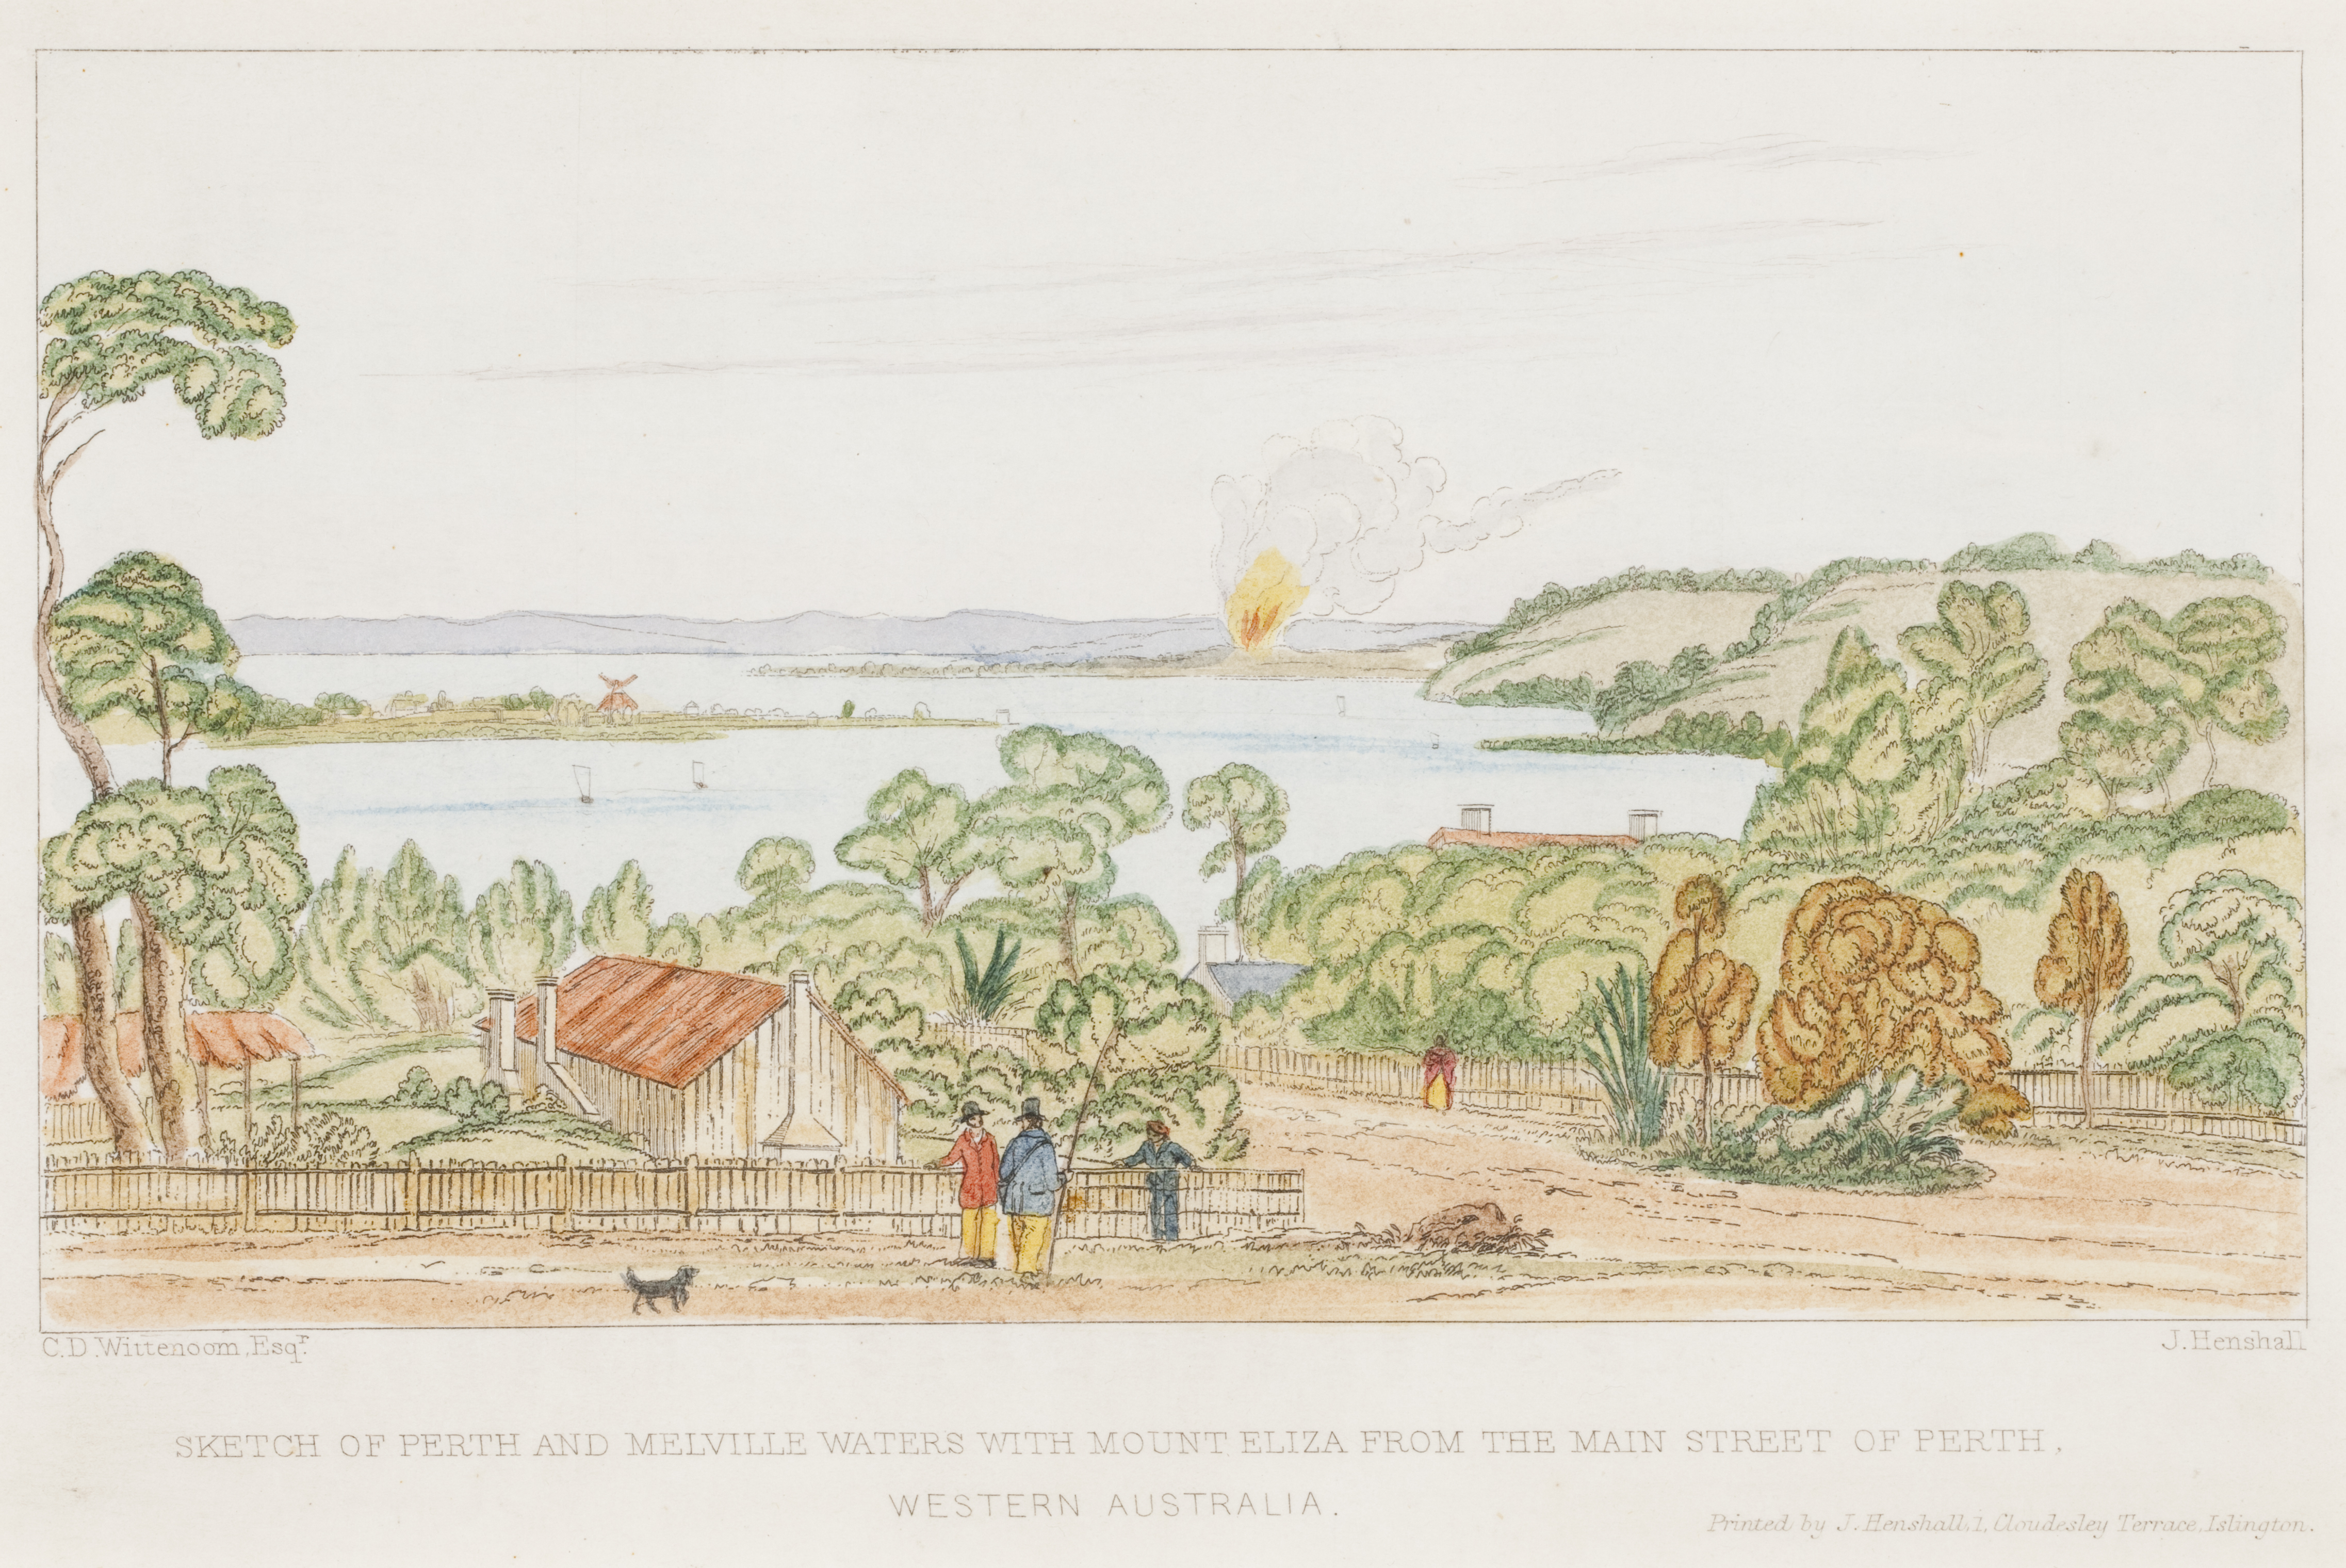 State Art Collection, Art Gallery of Western Australia-Sketch of Perth and Melville Waters with Mount Eliza from the main street of Perth, WA 1839